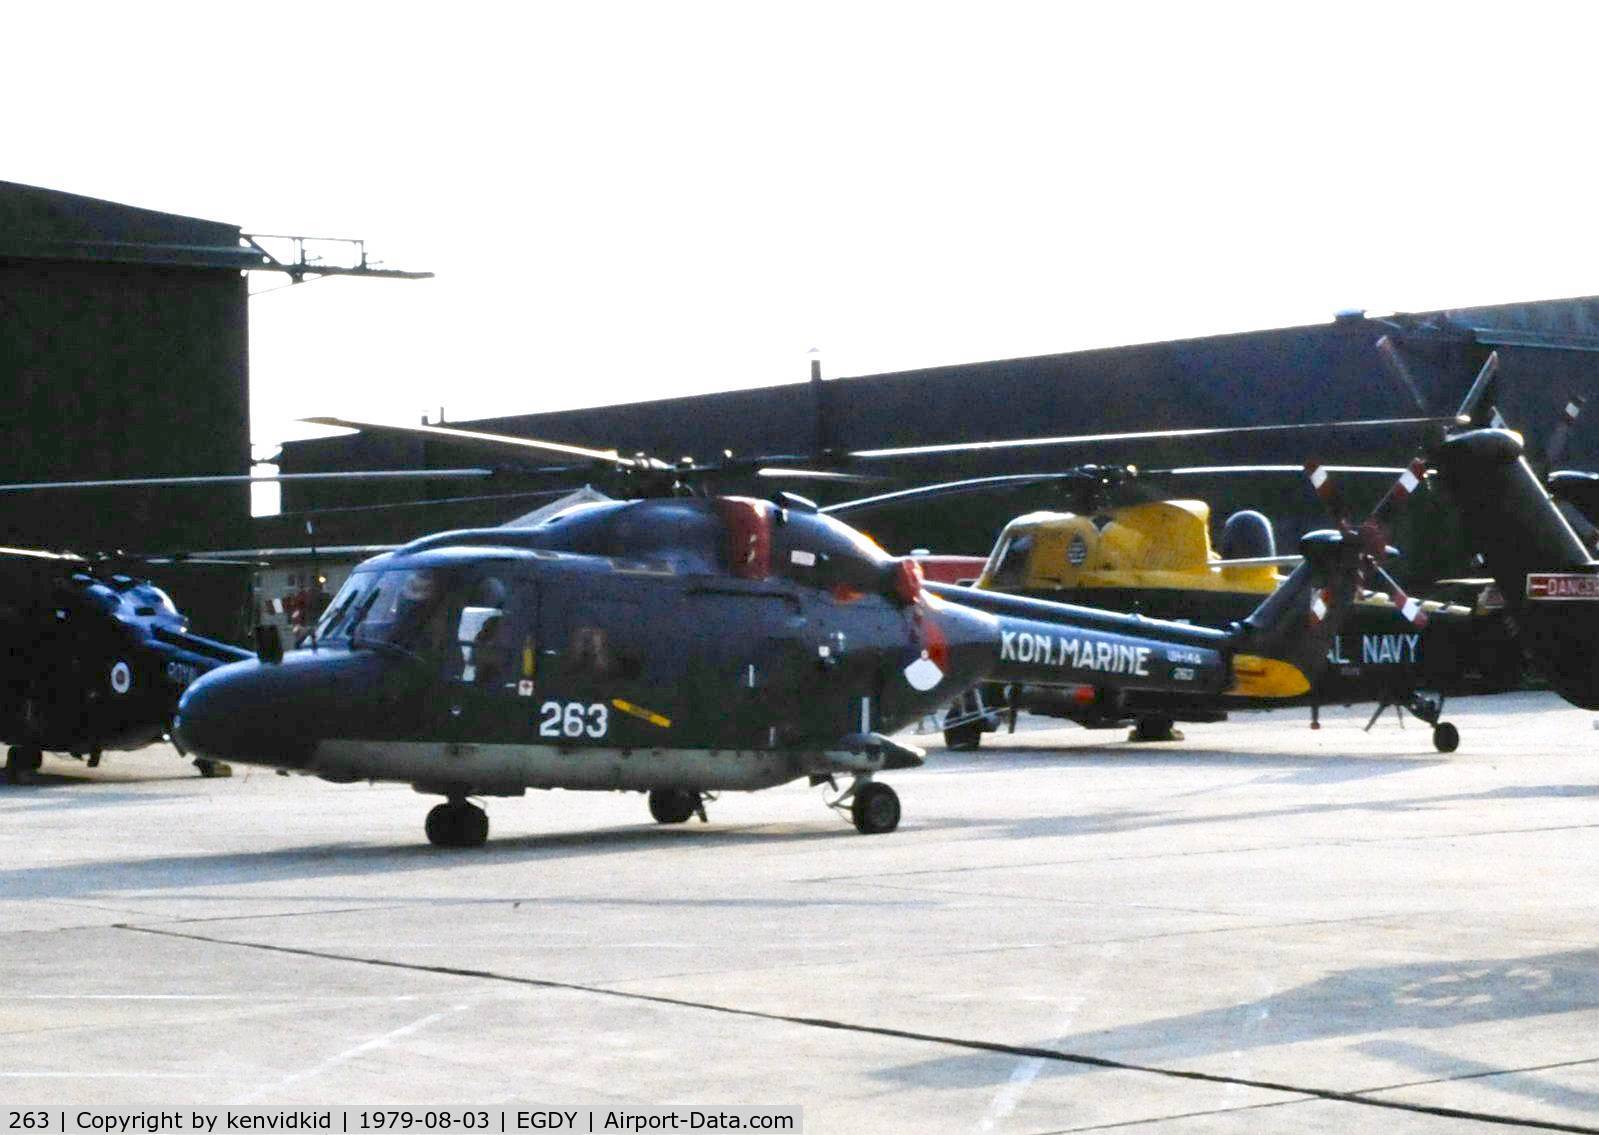 263, Westland Lynx HAS.2(FN) C/N 039, On static display at the 1979 Yeovilton air show.